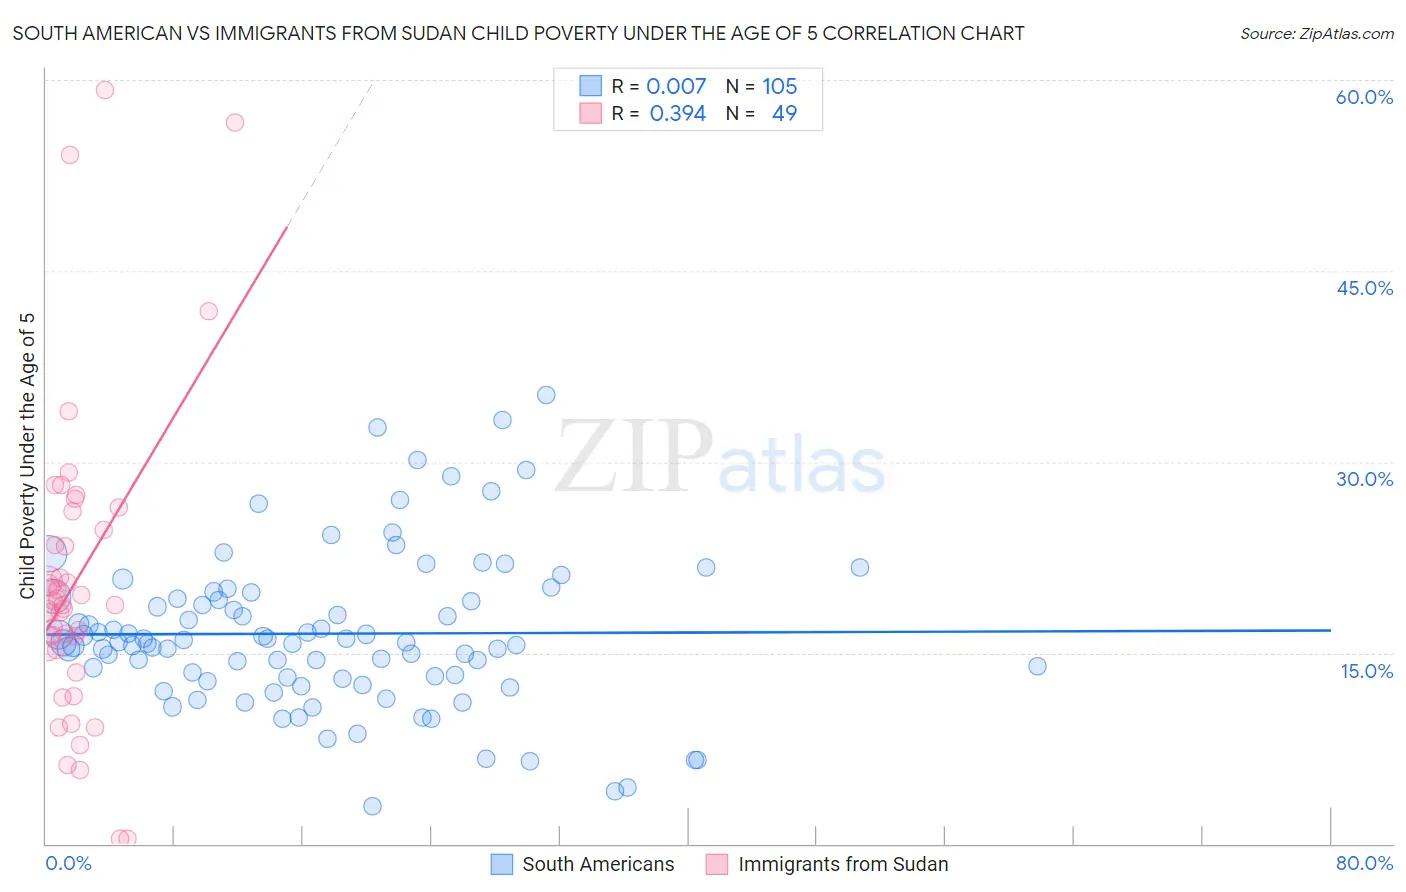 South American vs Immigrants from Sudan Child Poverty Under the Age of 5